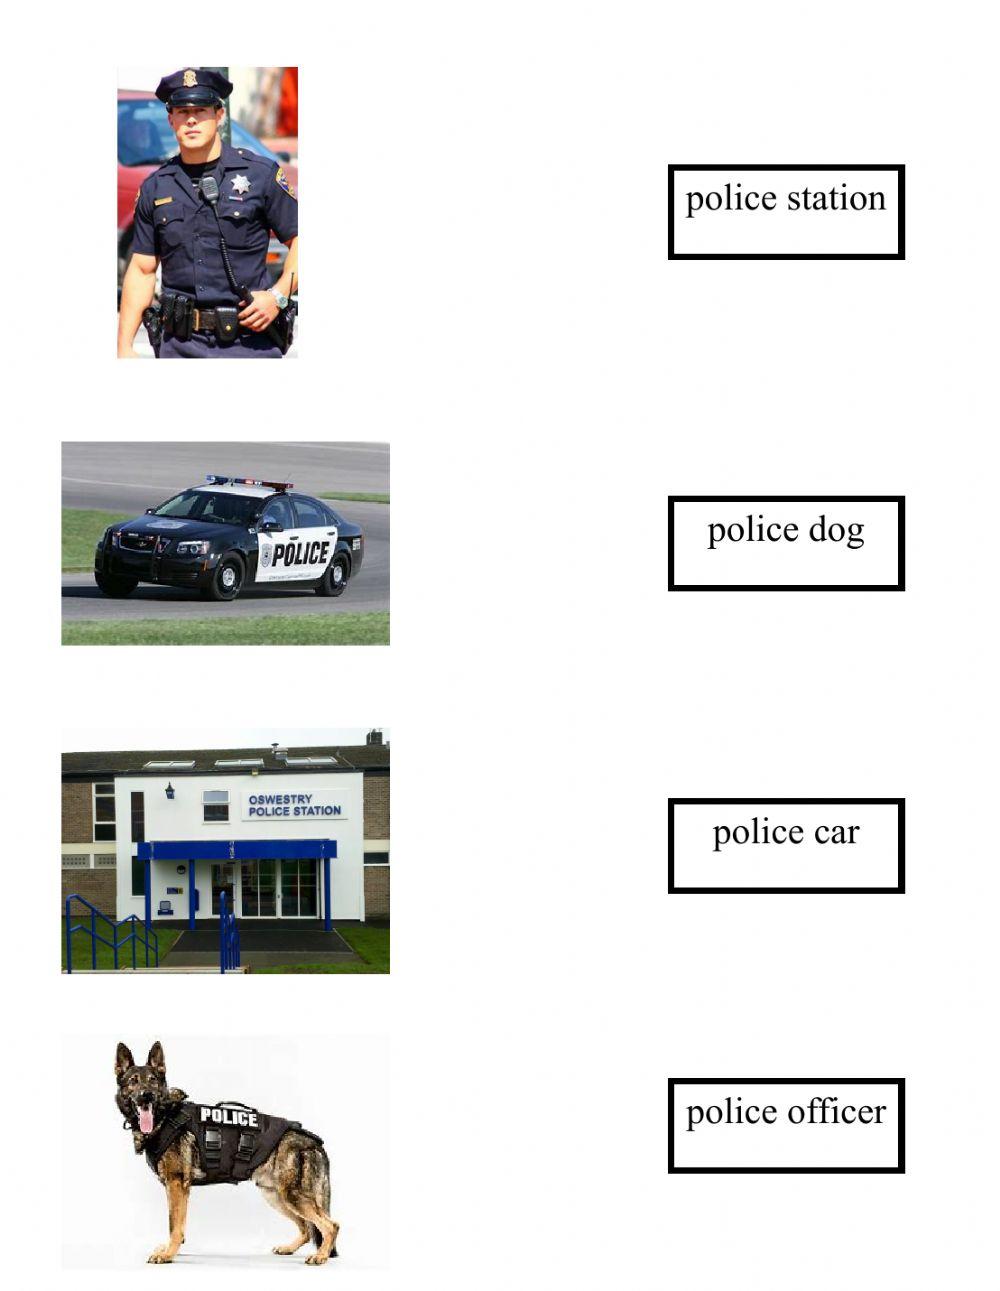 Police Officers